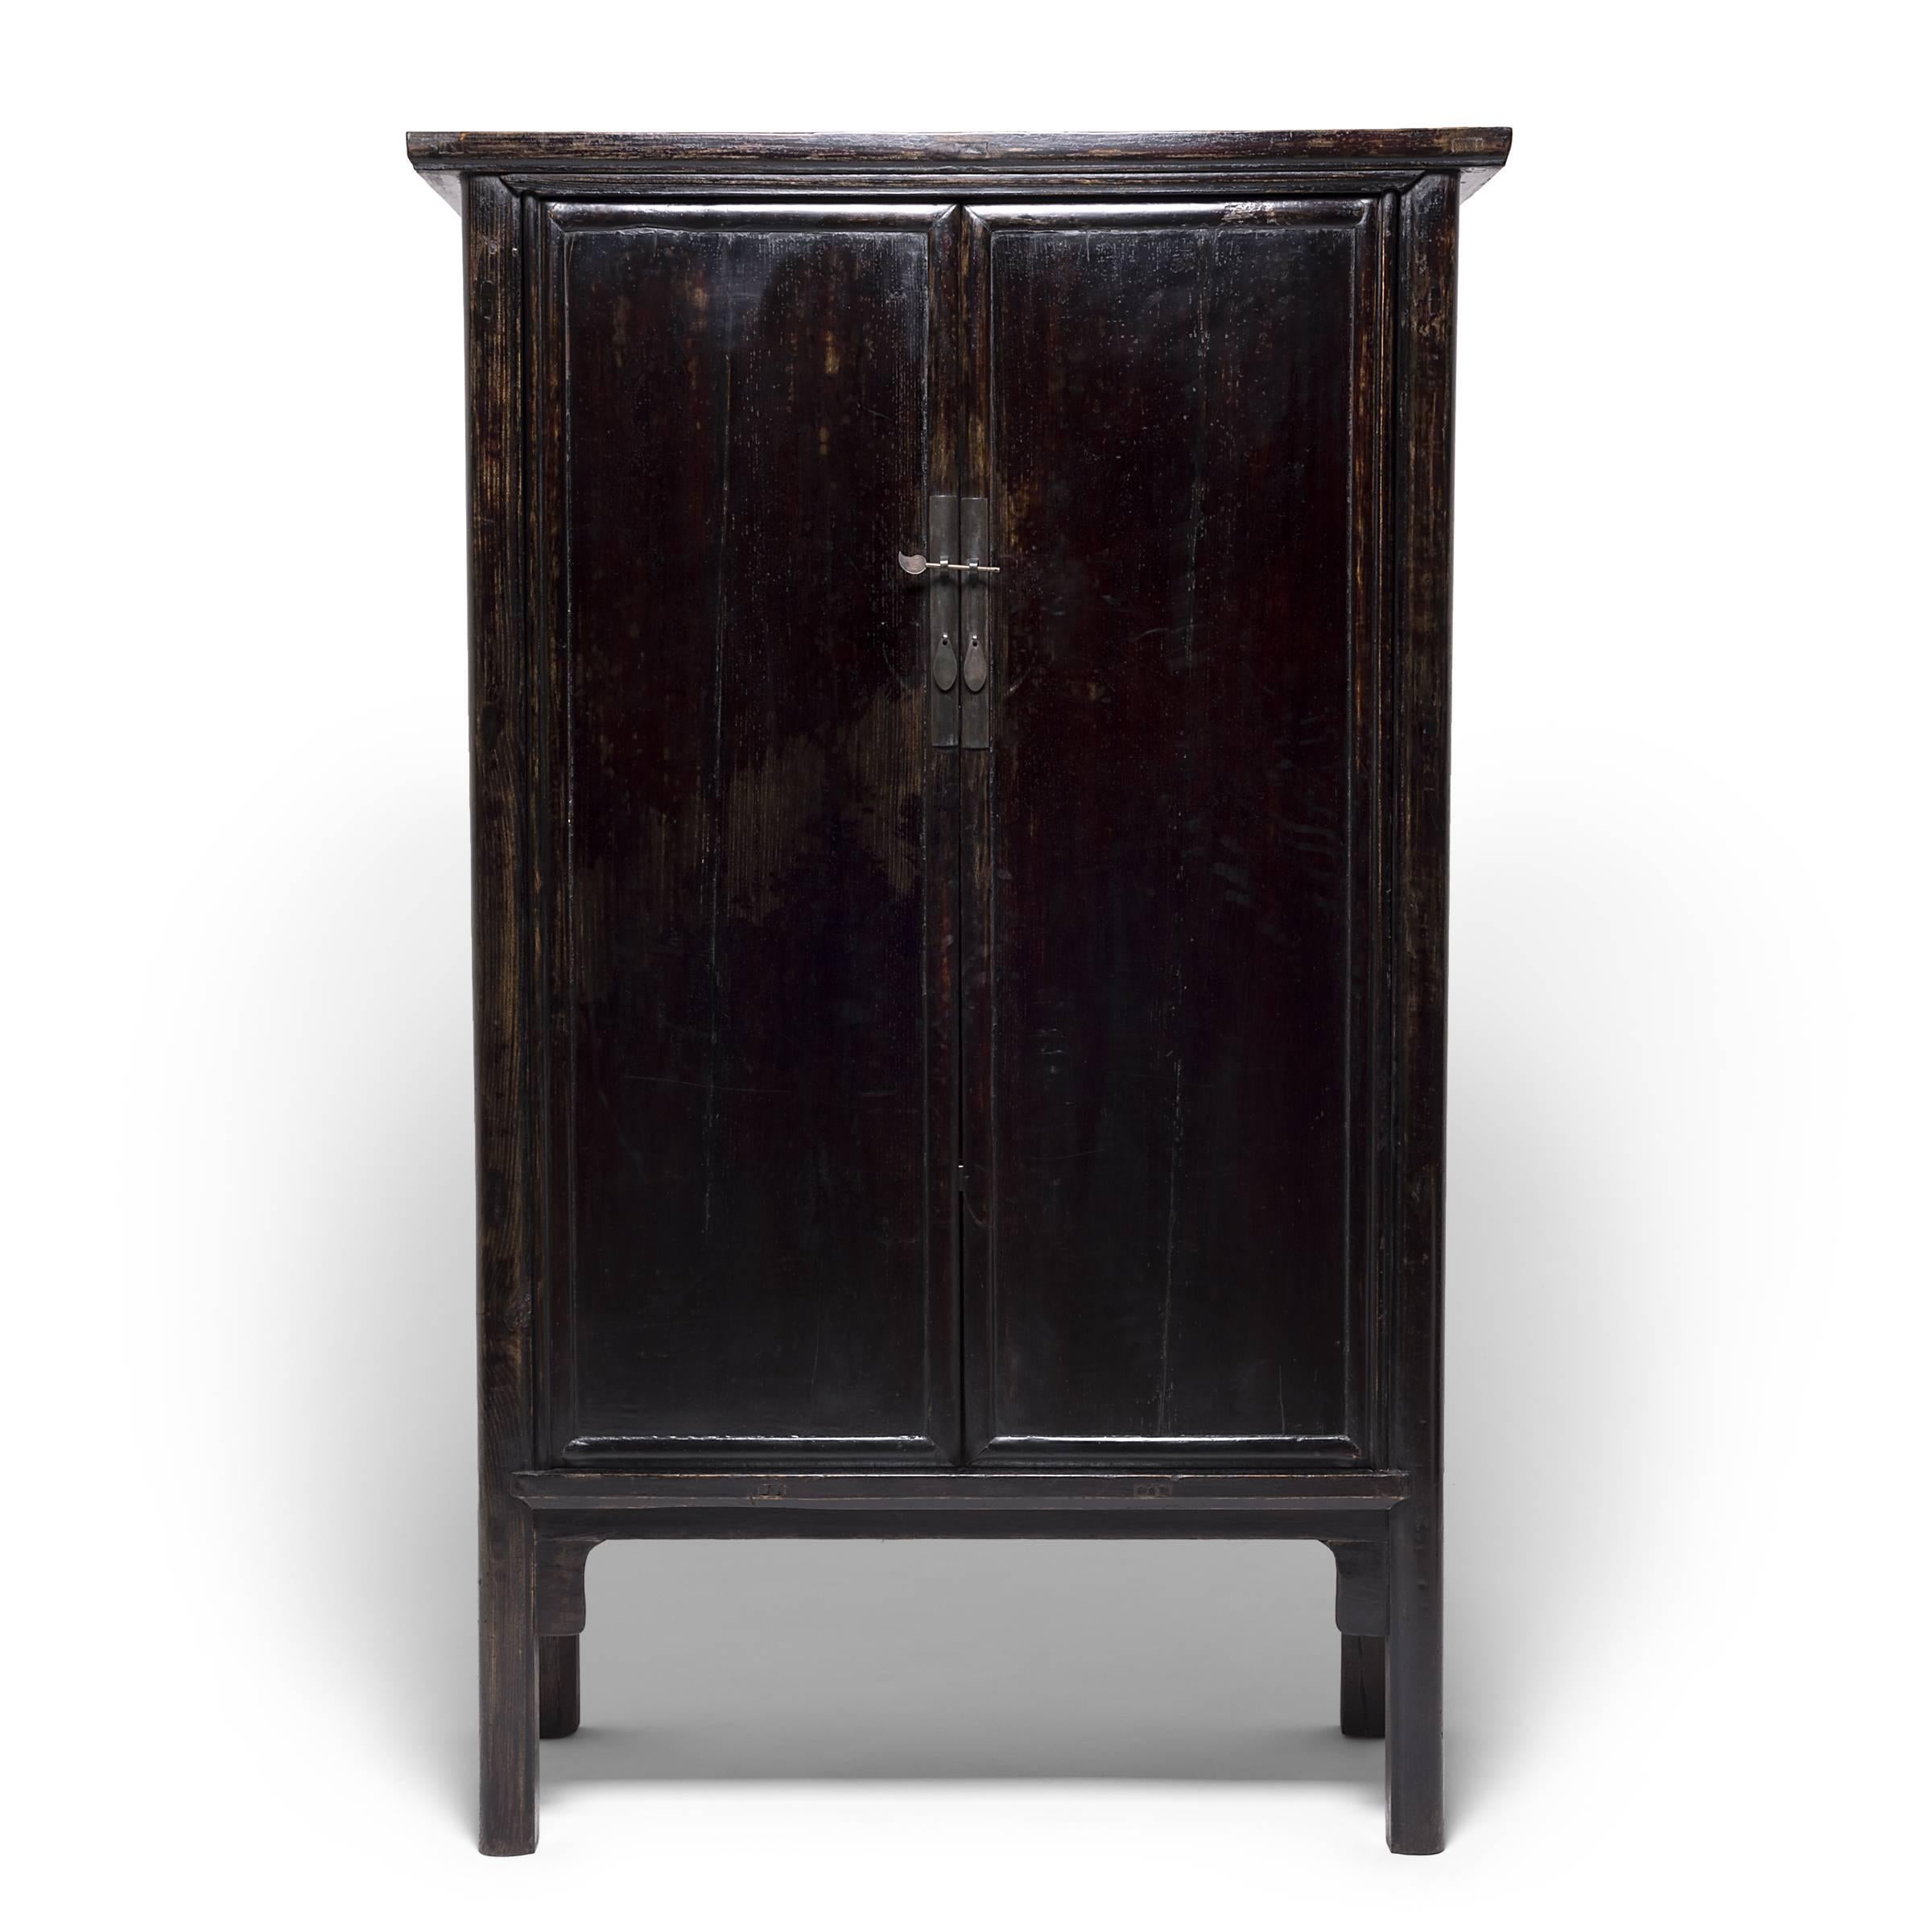 Created in China's Shanxi province, these striking, early 19th century cabinets take their name from their elegant, rounded wood frames. Austere in their simplicity, the cabinets' rich lacquer was hand applied, layer upon layer, to achieve a deep